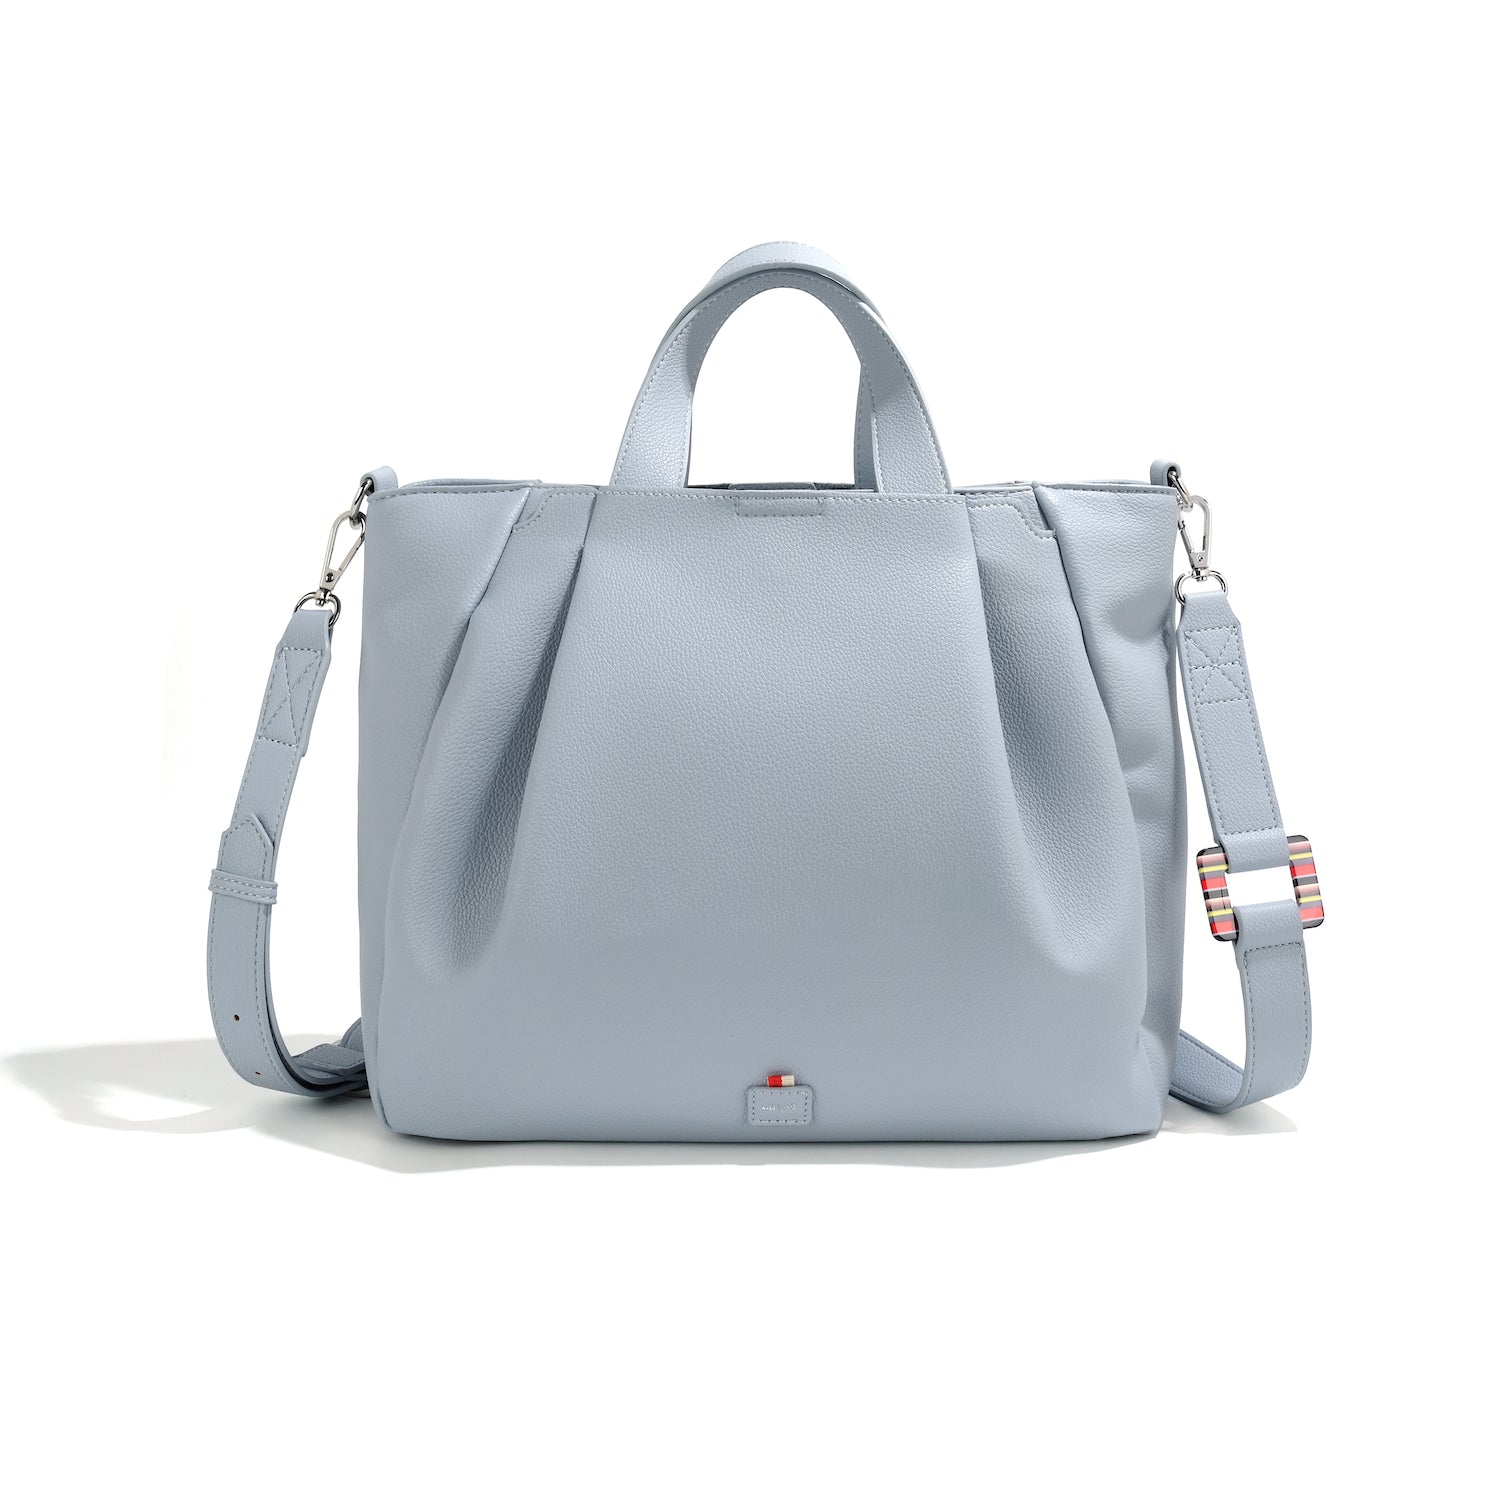 co-lab Port Crossbody Bag - Robin Blue Accessories - Other Accessories - Handbags & Wallets by co-lab | Grace the Boutique